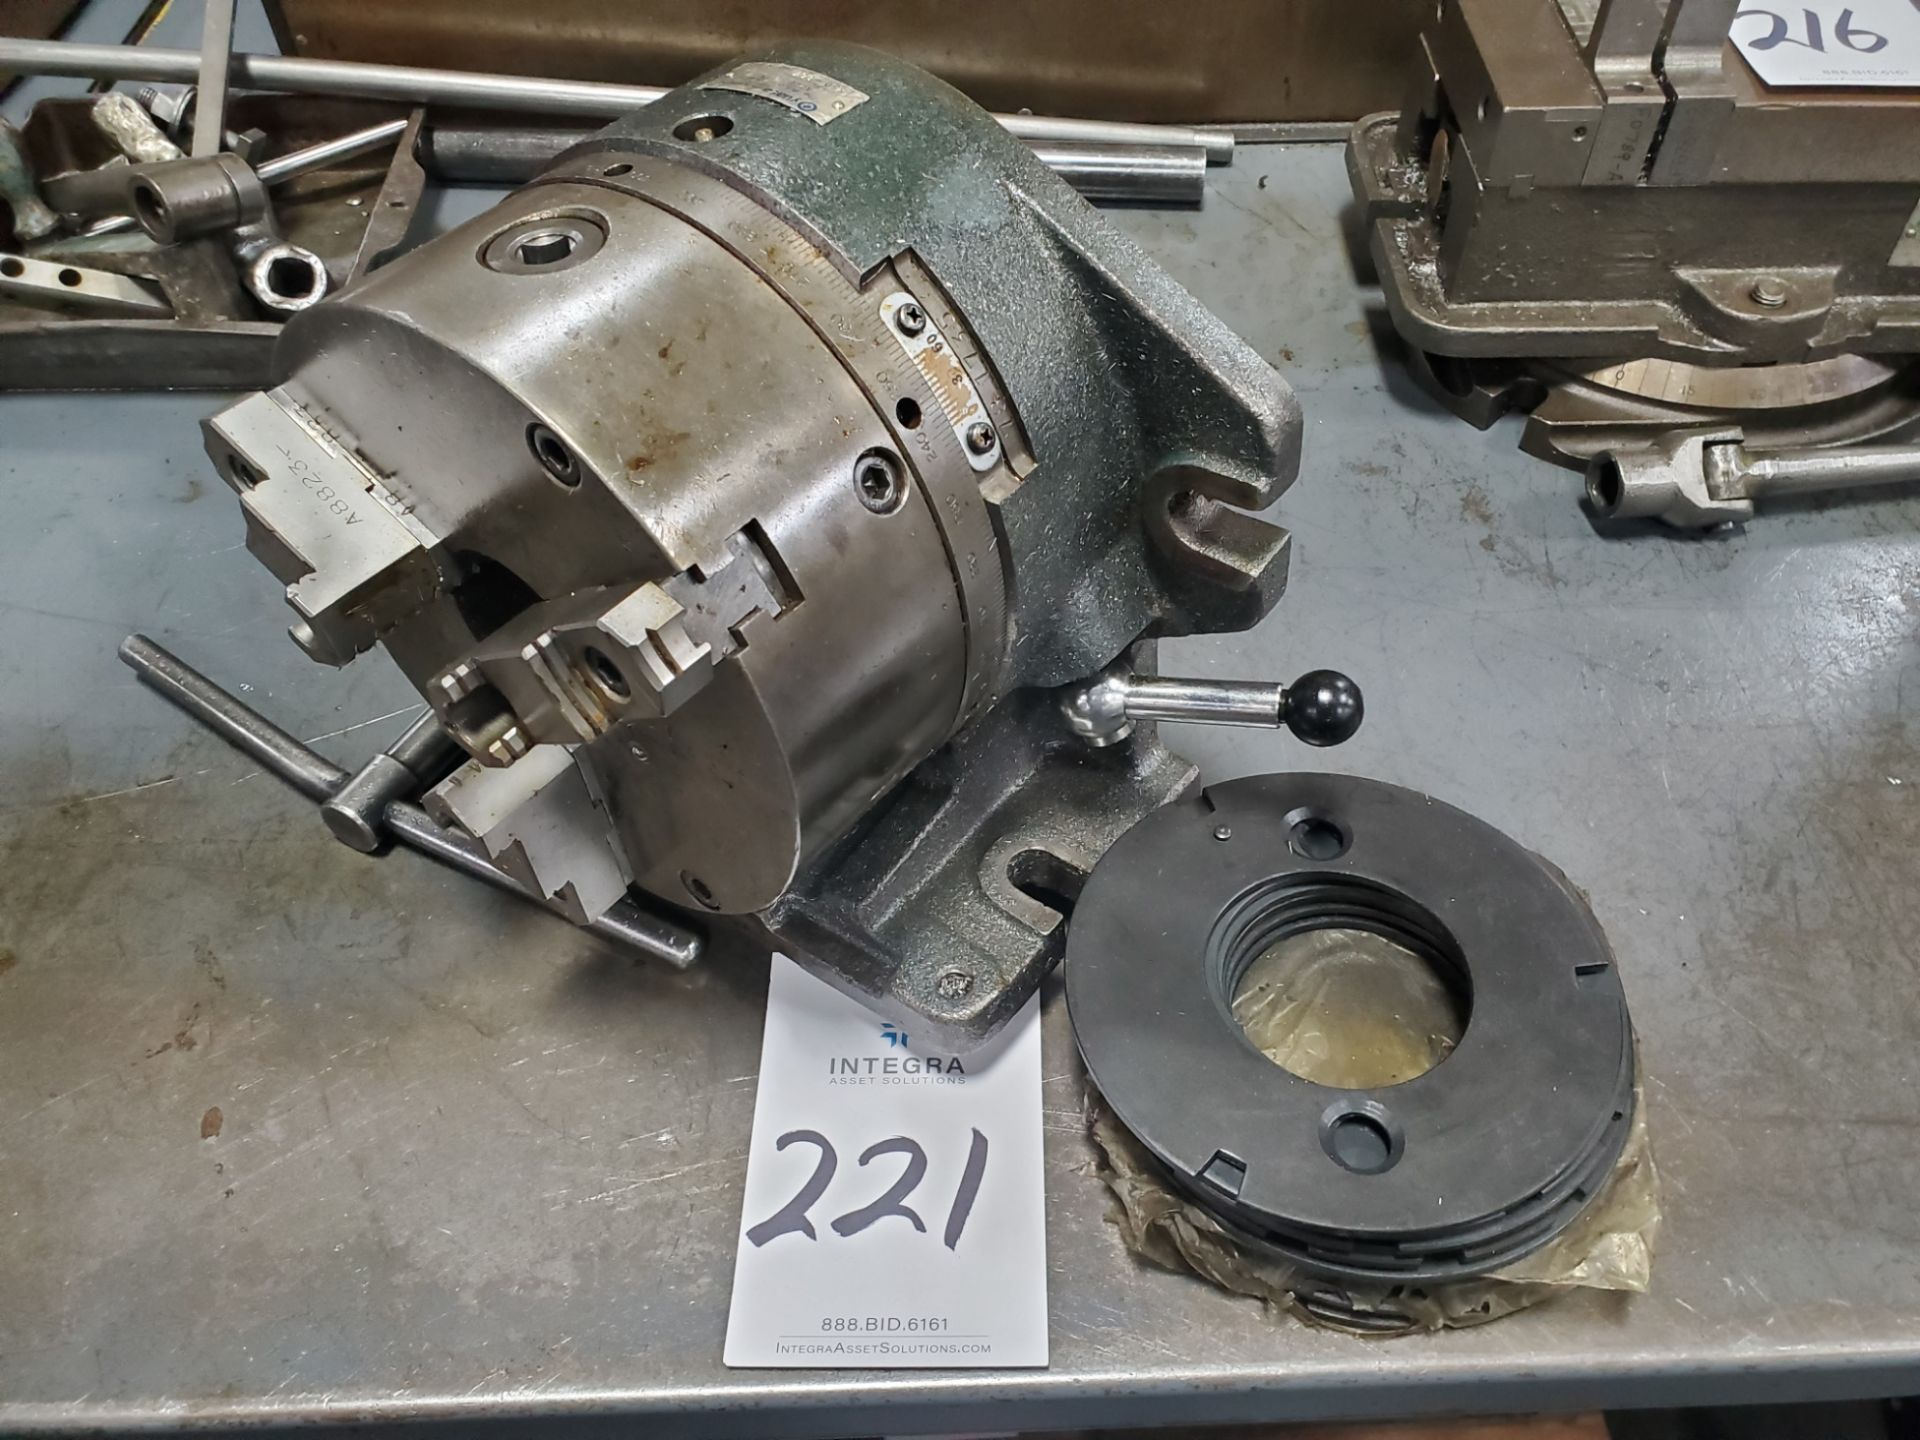 Yuasa Accu-Dex Rotary Indexer Super Spacer with 8" 3-Jaw Chuck